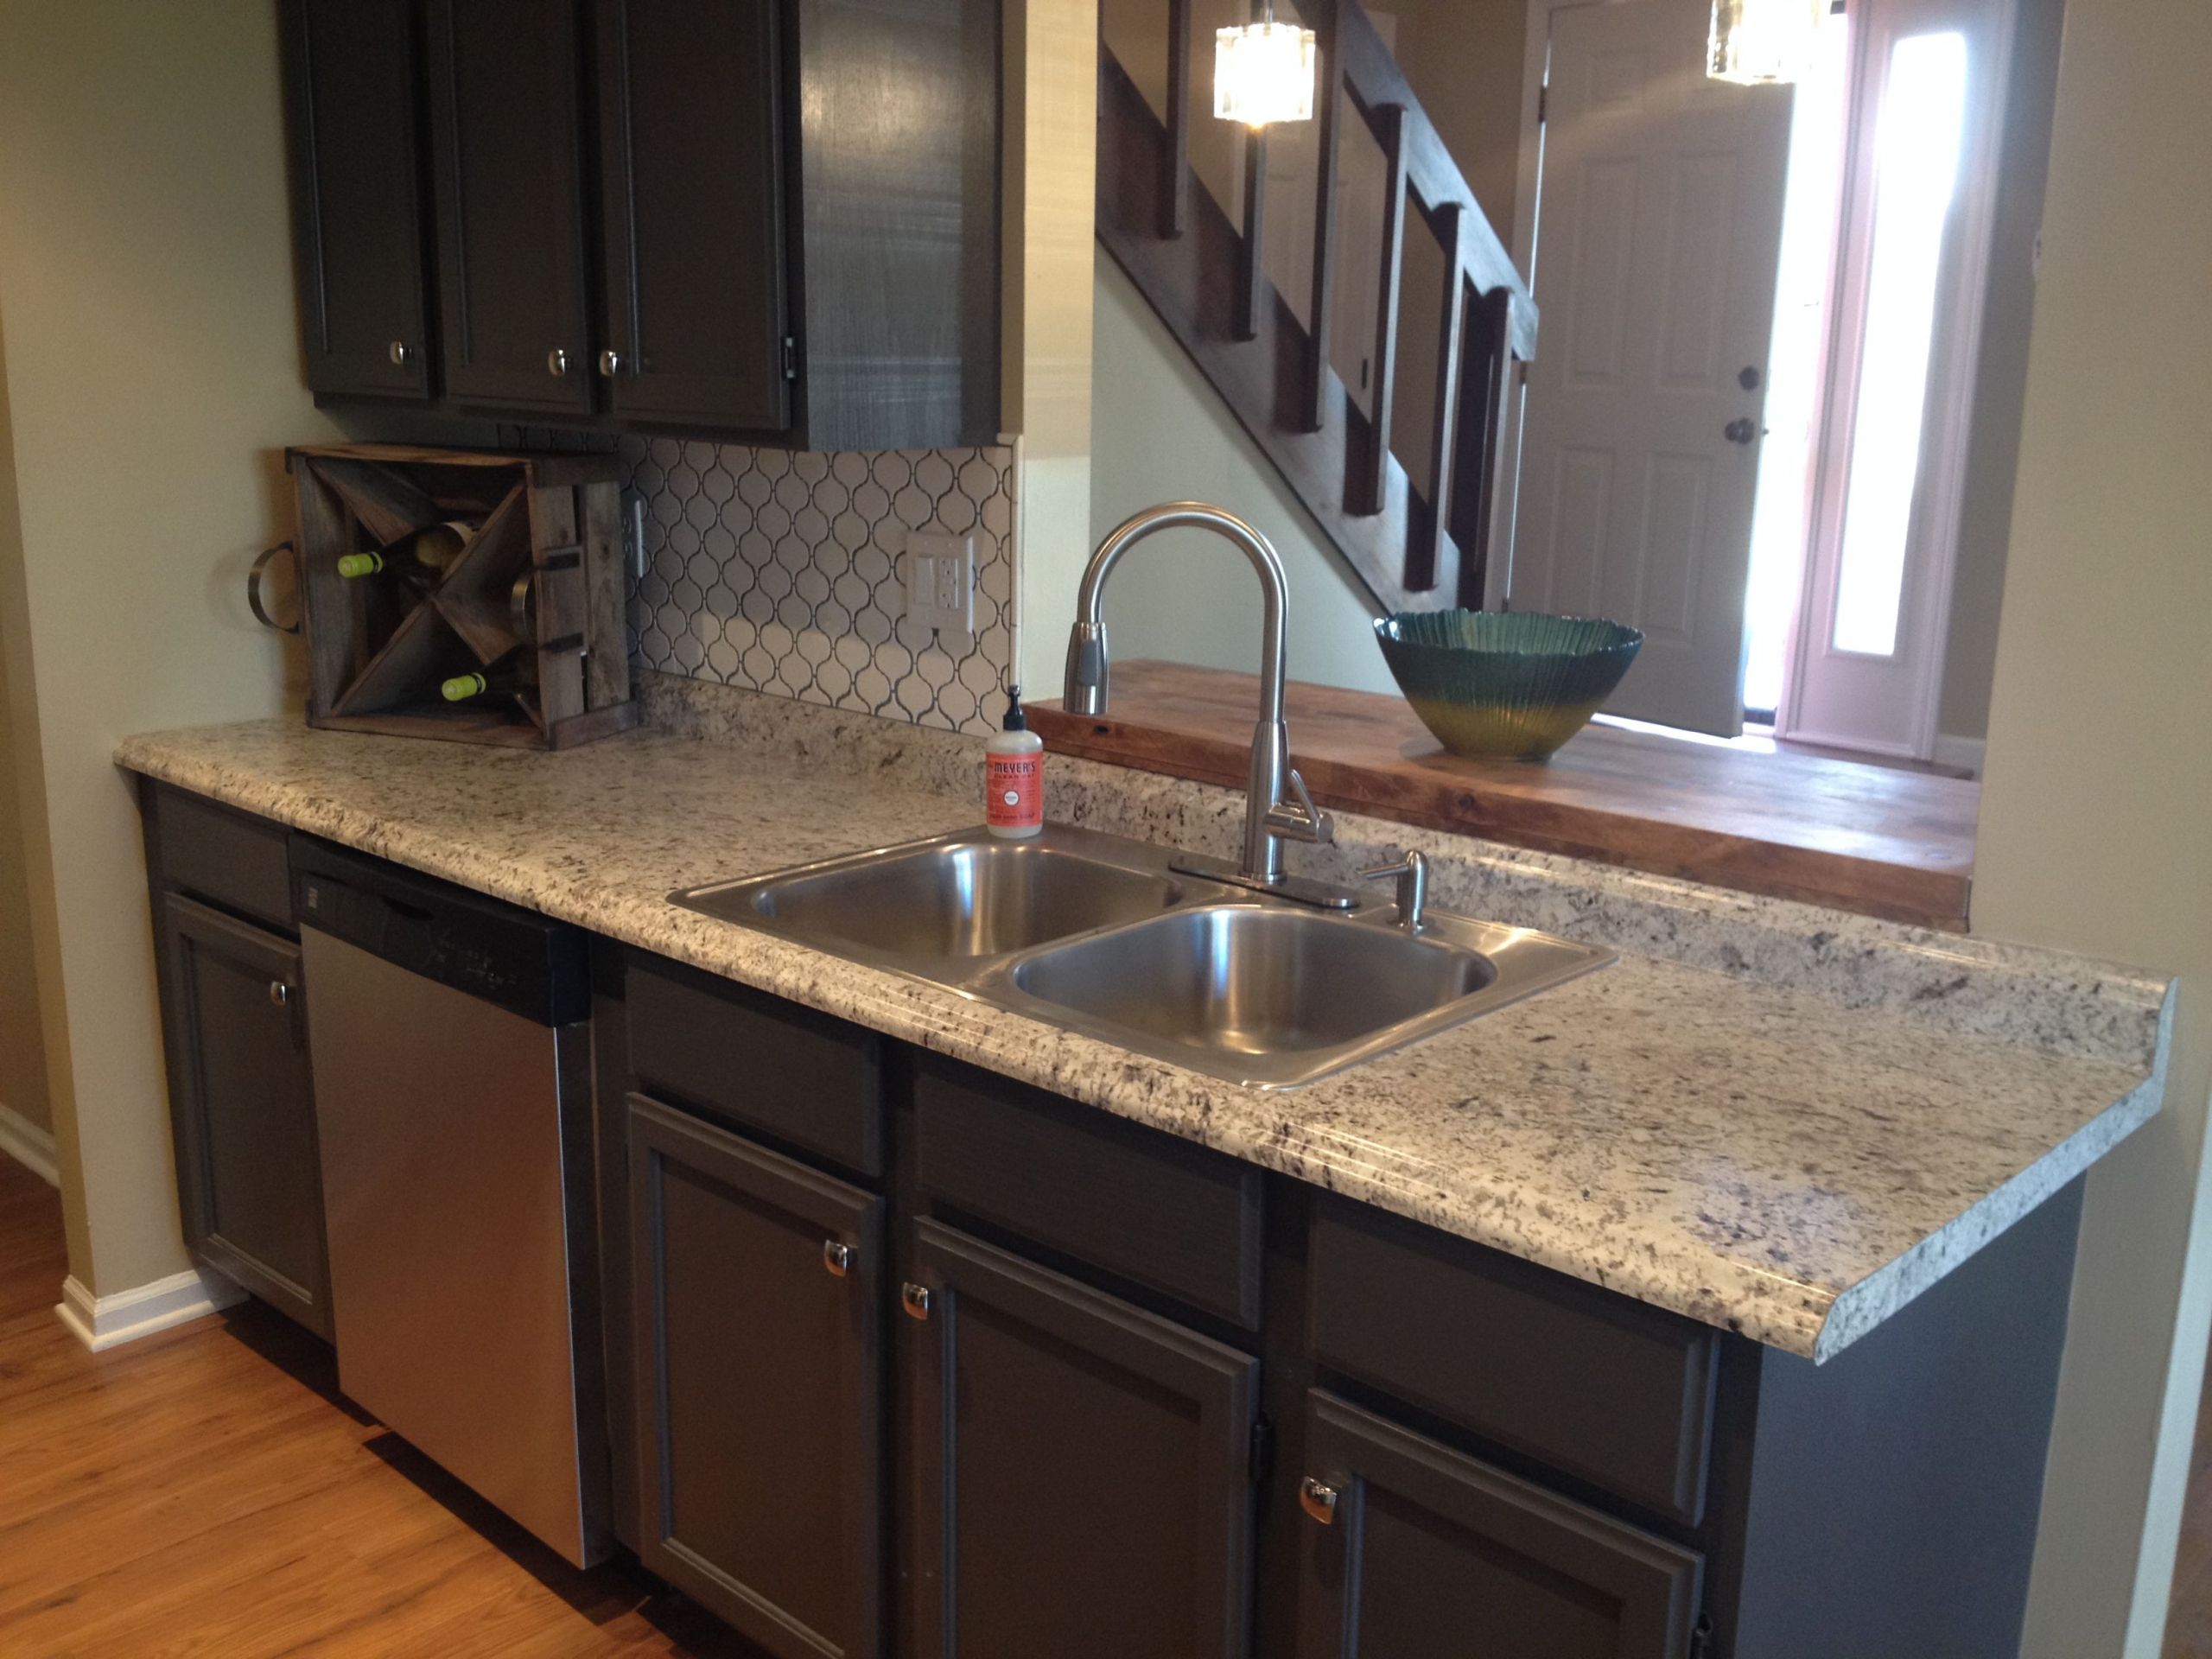 Spray Paint Kitchen Countertops
 Dressed up this distressed kitchen by spray painting the